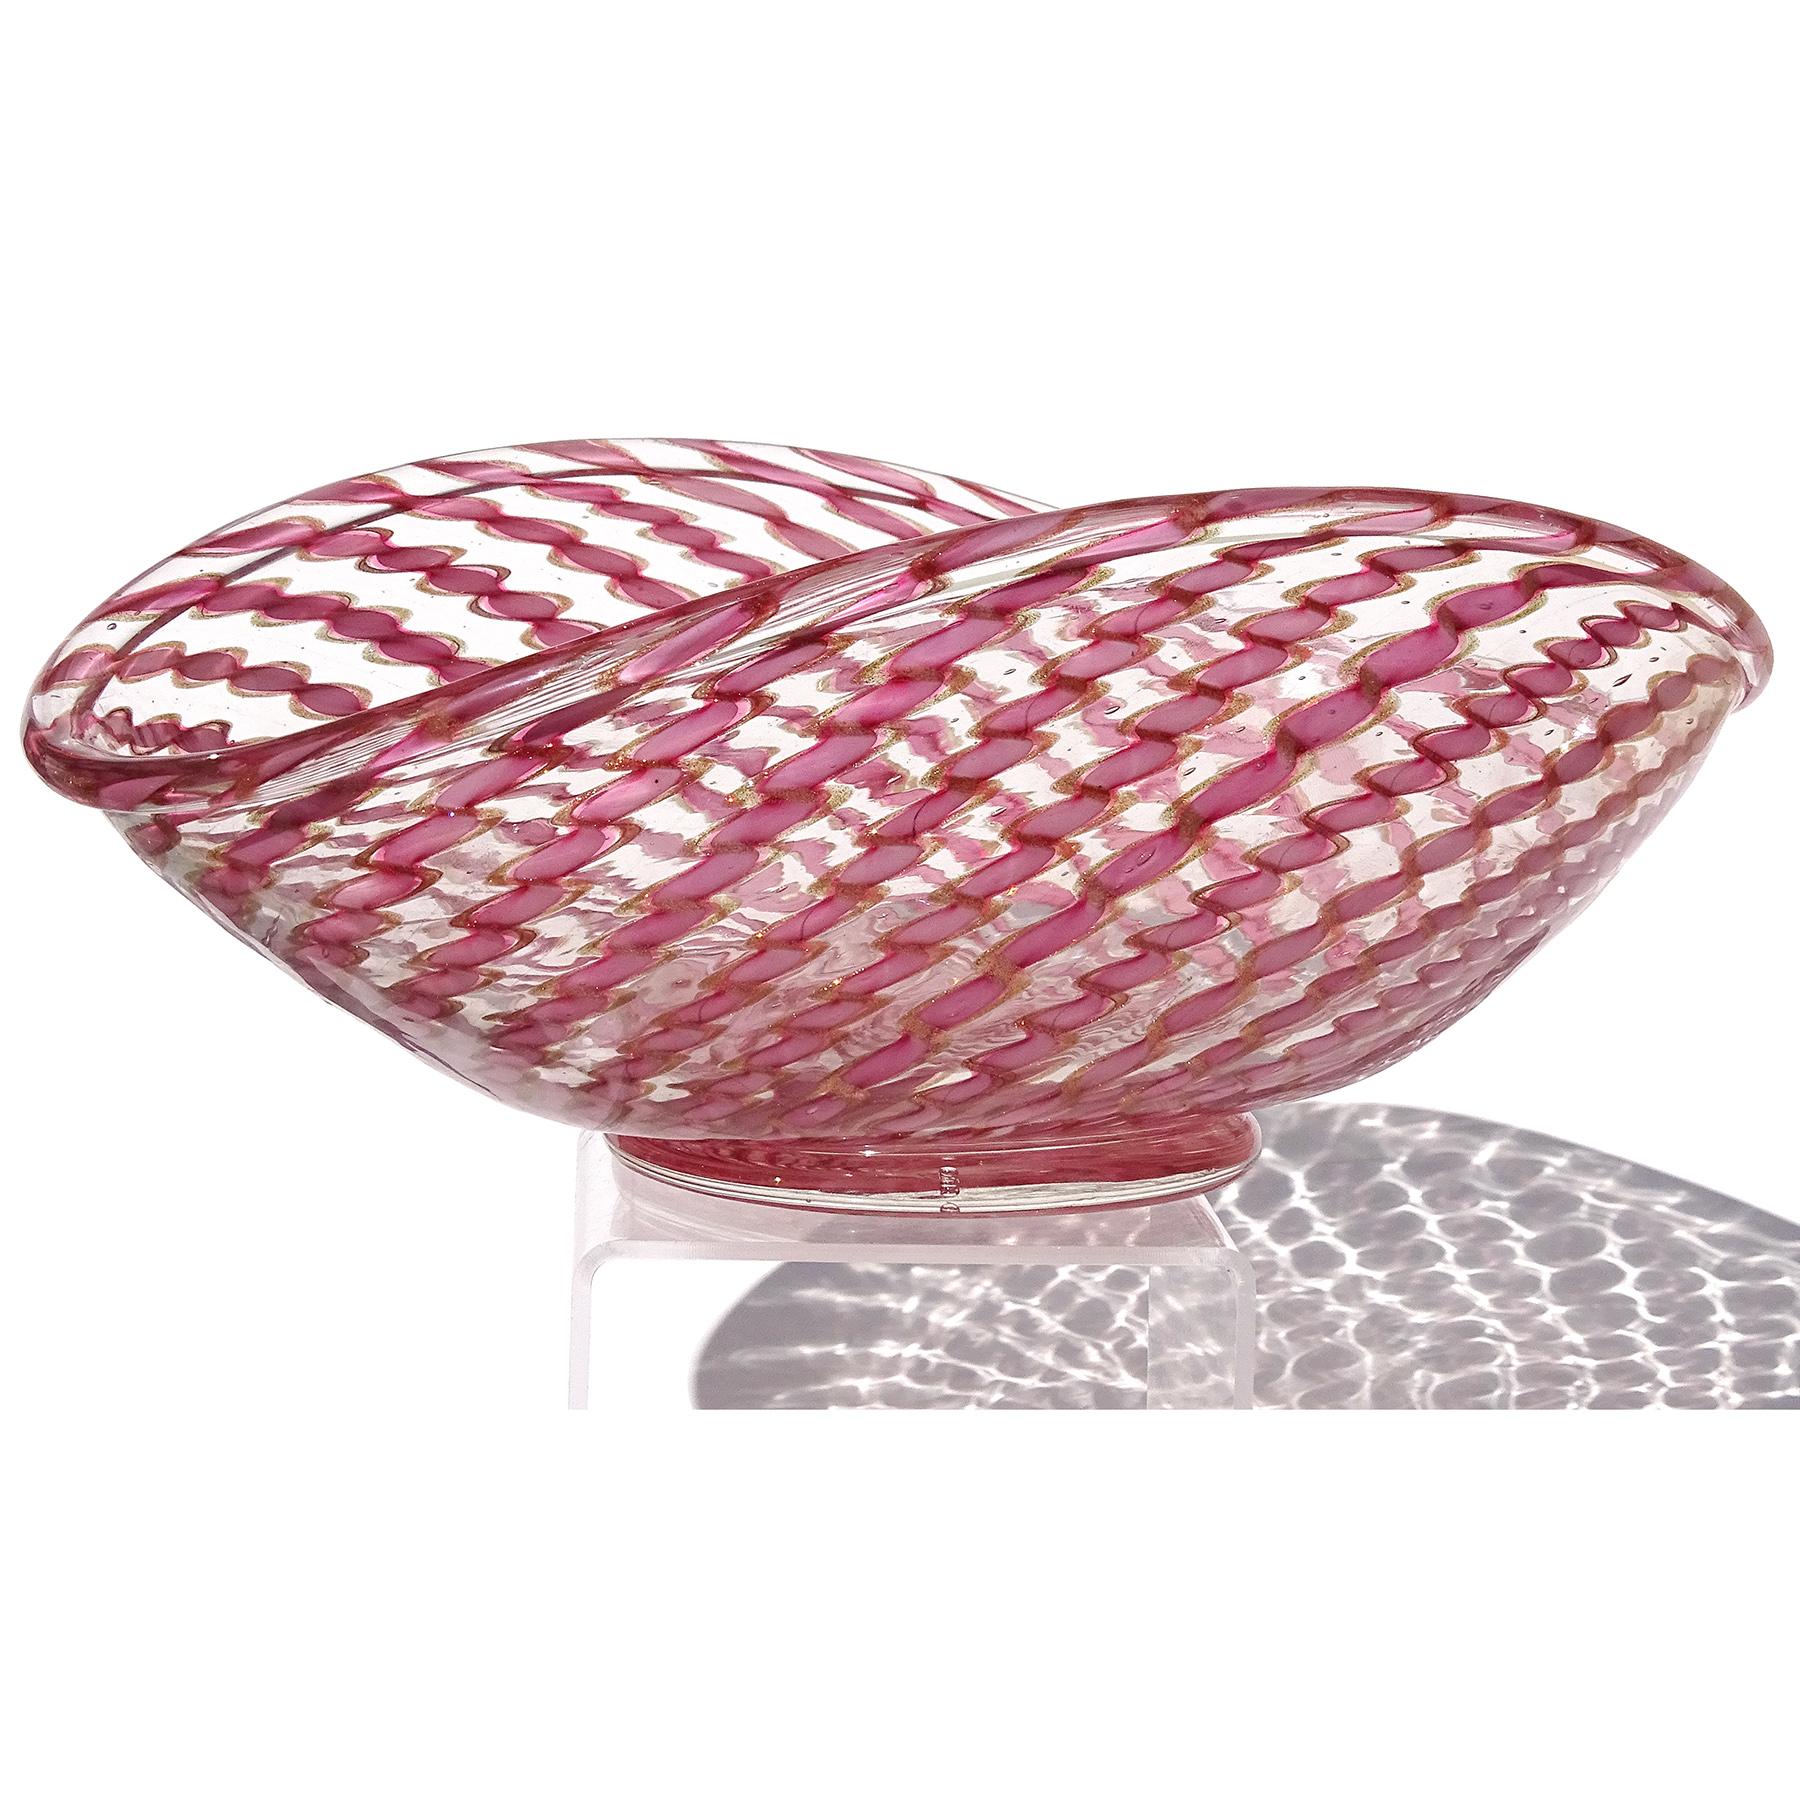 Beautiful, and large, vintage Murano hand blown pink and aventurine ribbons Italian art glass centerpiece bowl. Documented to the Fratelli Toso company. The bowl is made with twisting pink and copper aventurine flecks ribbons. It has an oval shape,